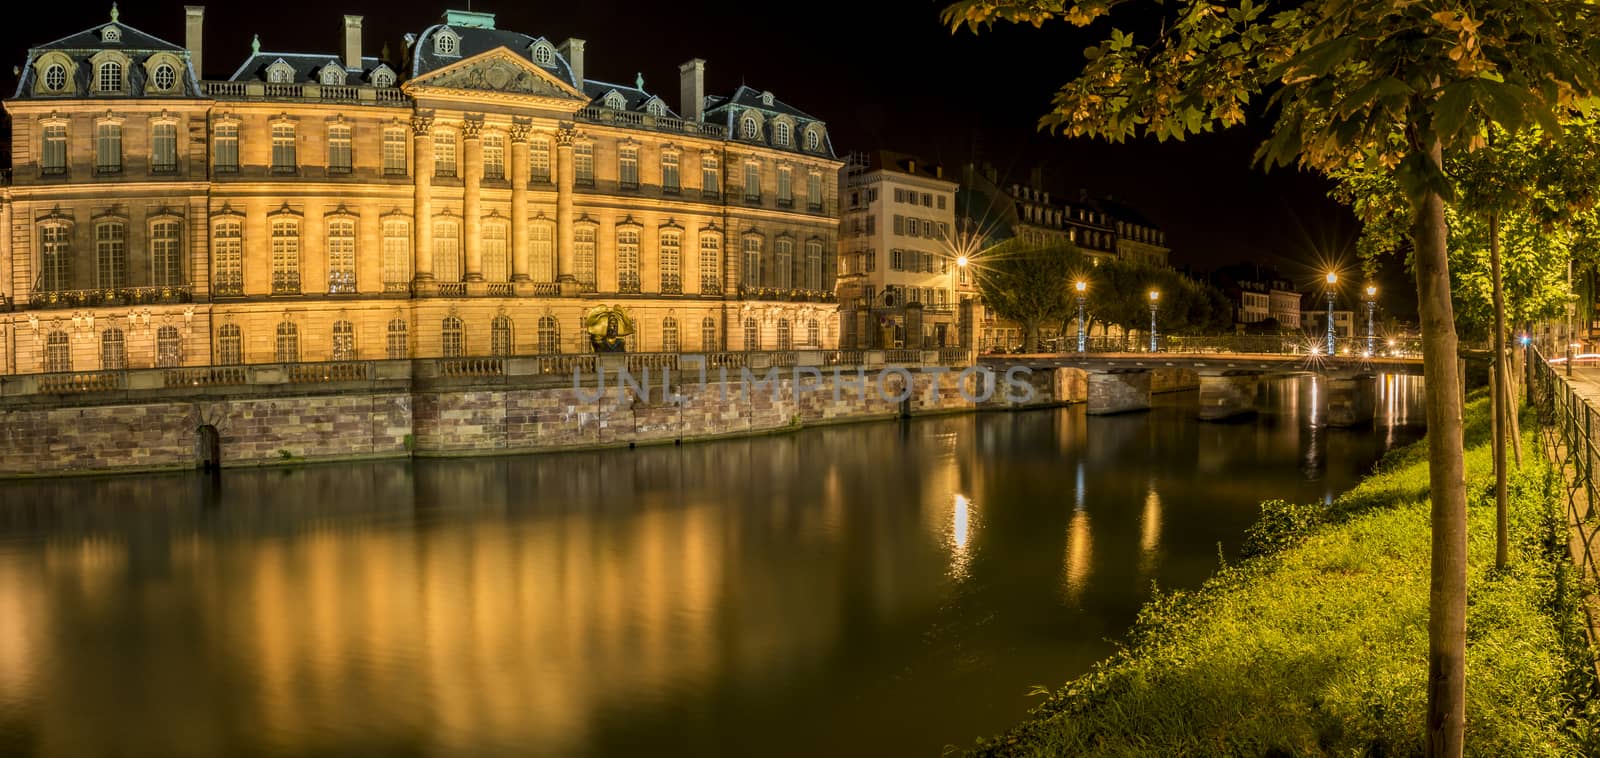 Night panoramic view with the Rohan Palace and the river Ill, with building and yellow lights reflected in its water.